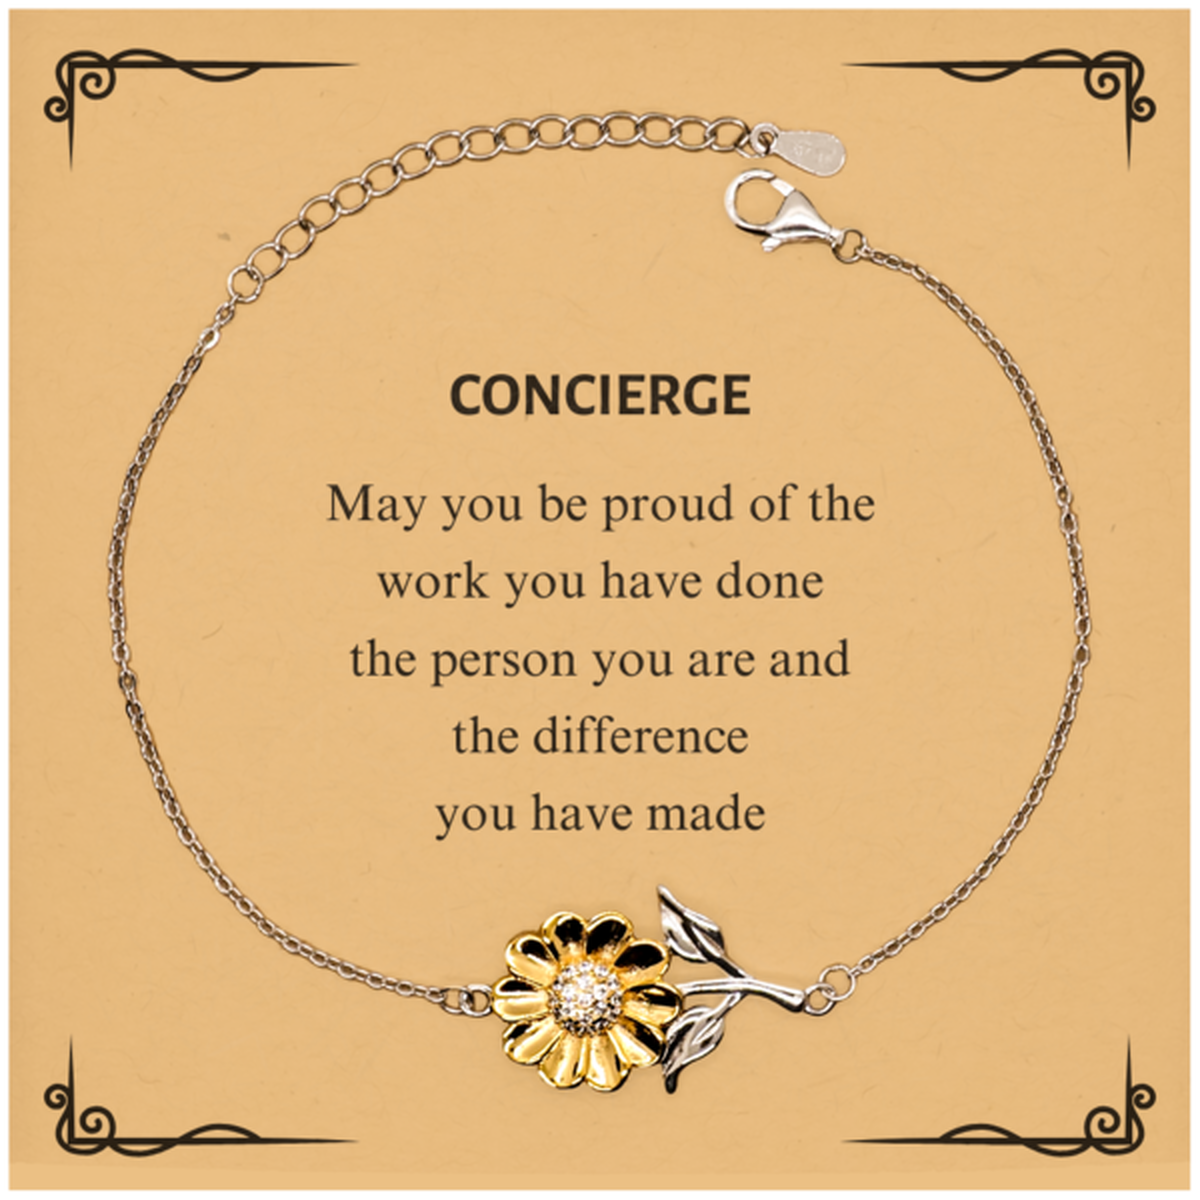 Concierge May you be proud of the work you have done, Retirement Concierge Sunflower Bracelet for Colleague Appreciation Gifts Amazing for Concierge